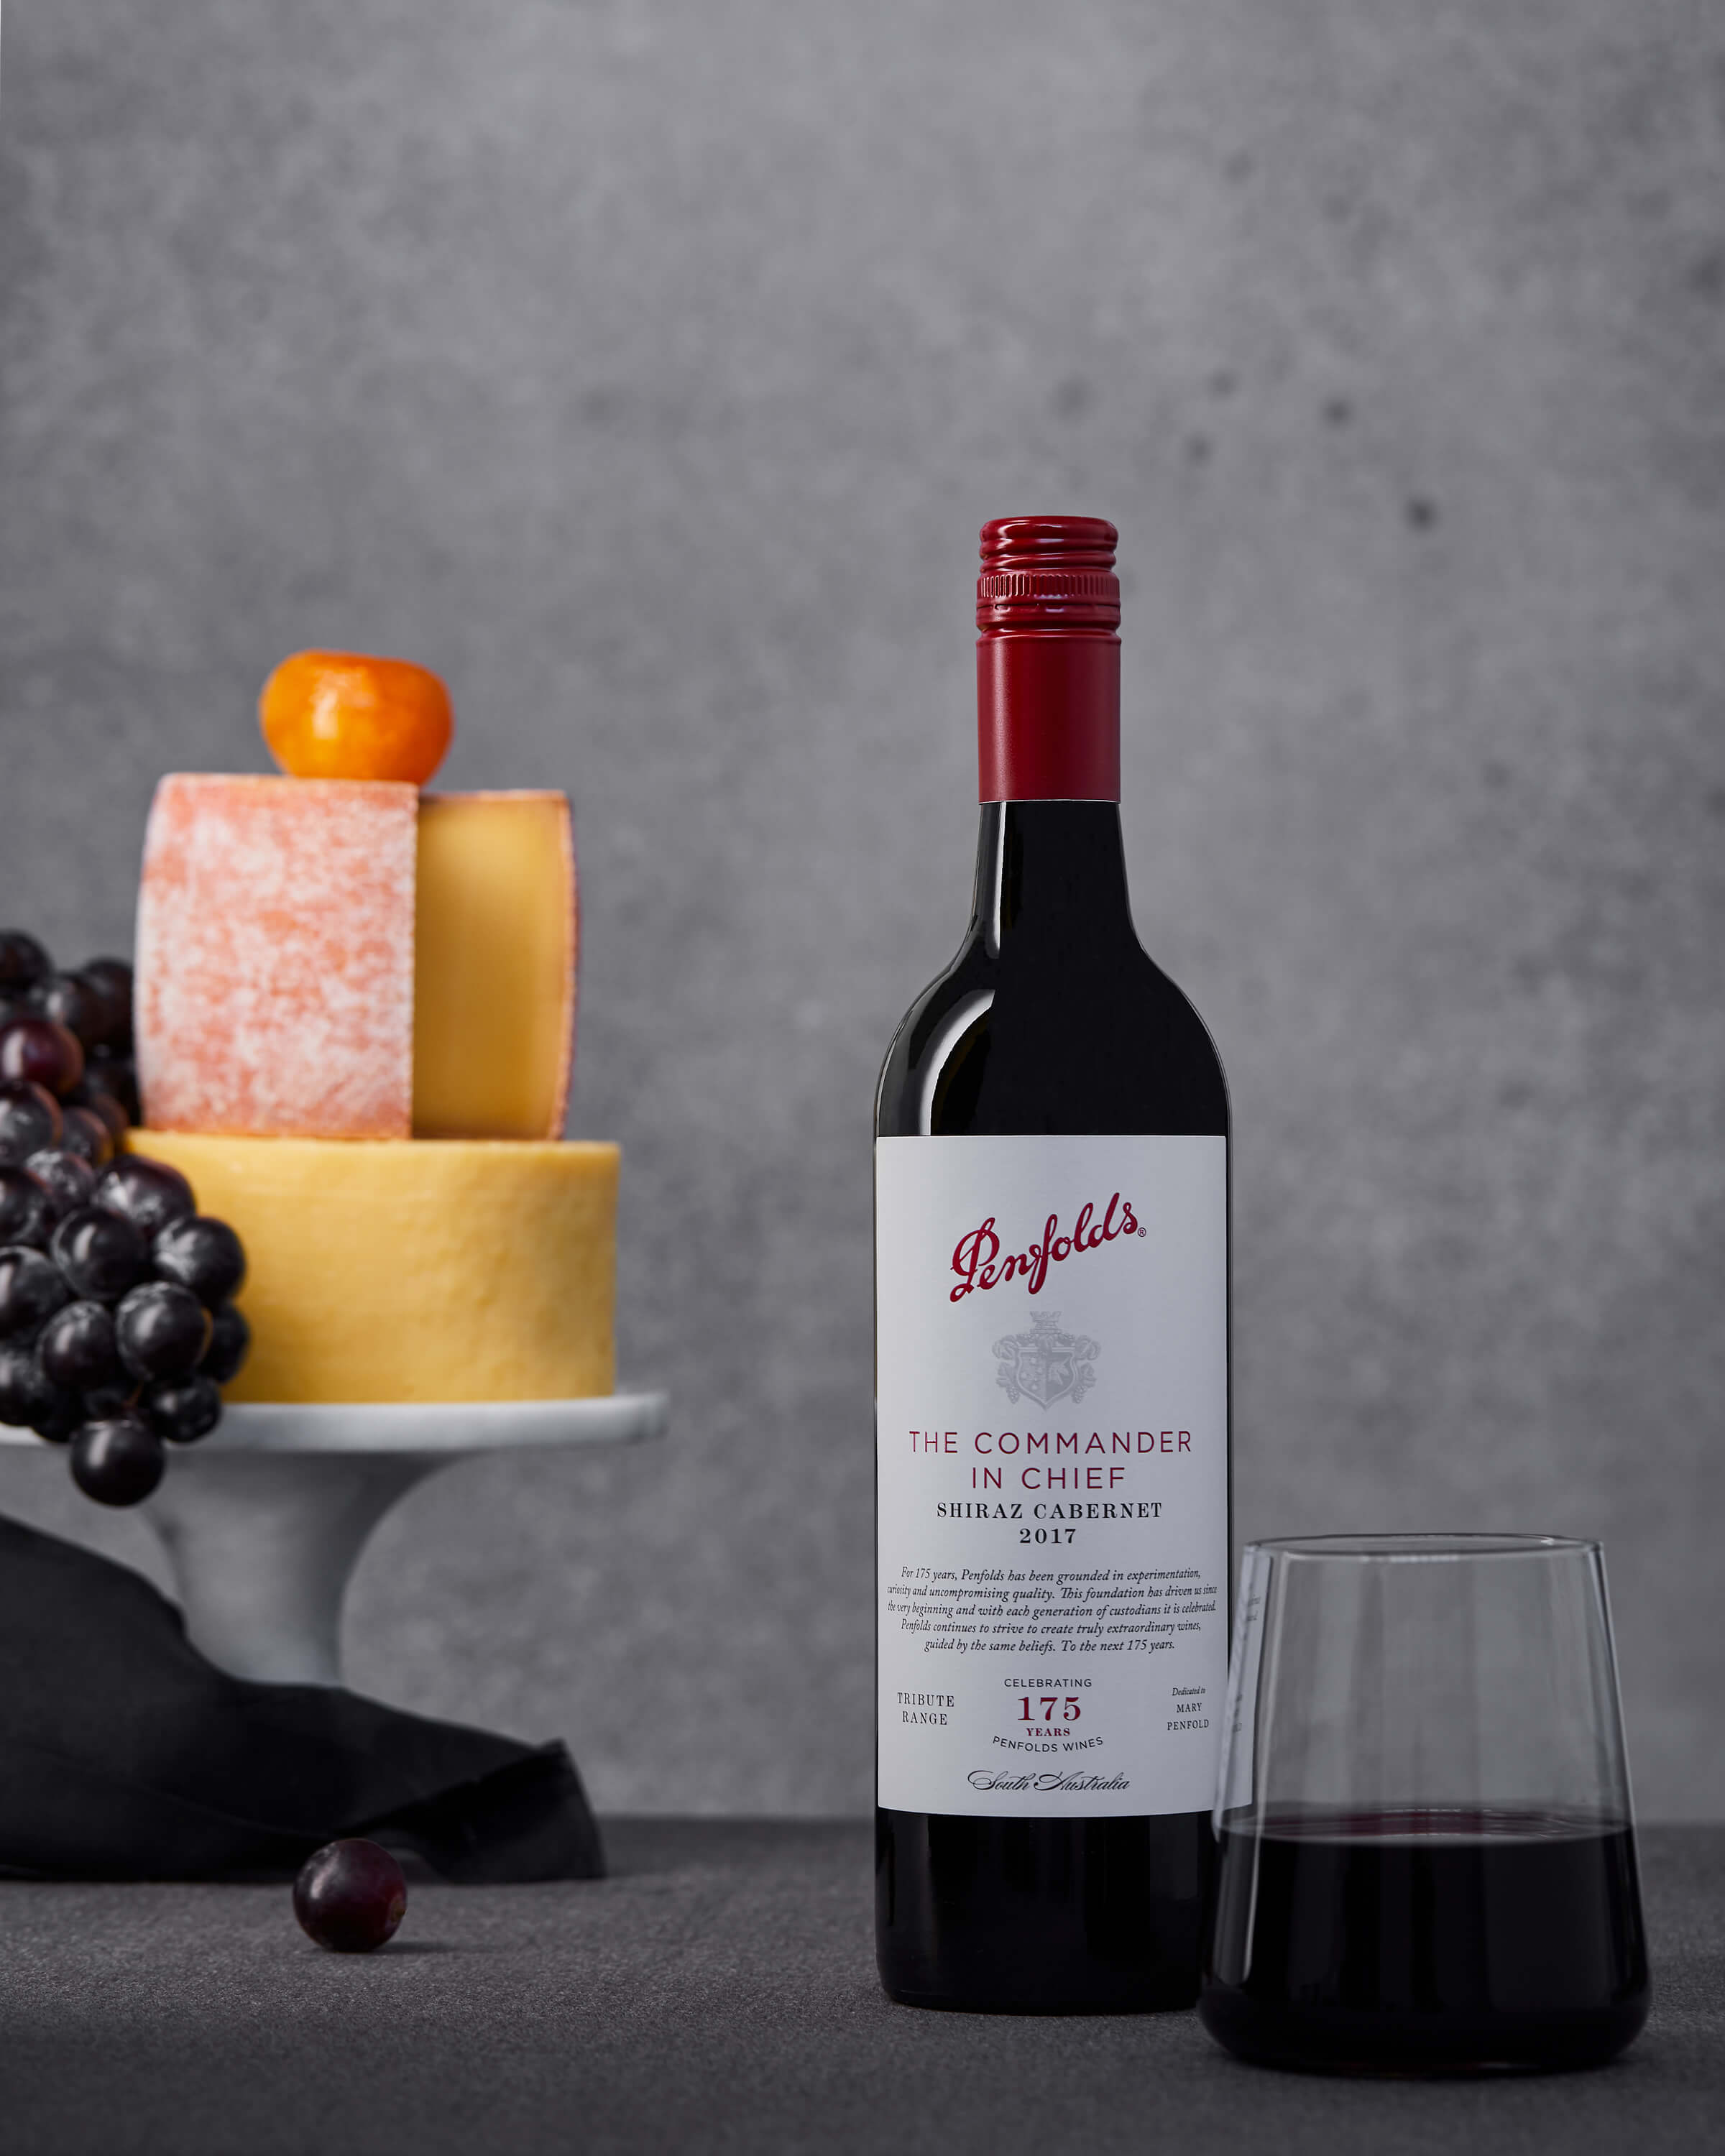 penfolds-wines-the-tailored-man-175-years-28-march-2019-esteemed-creator